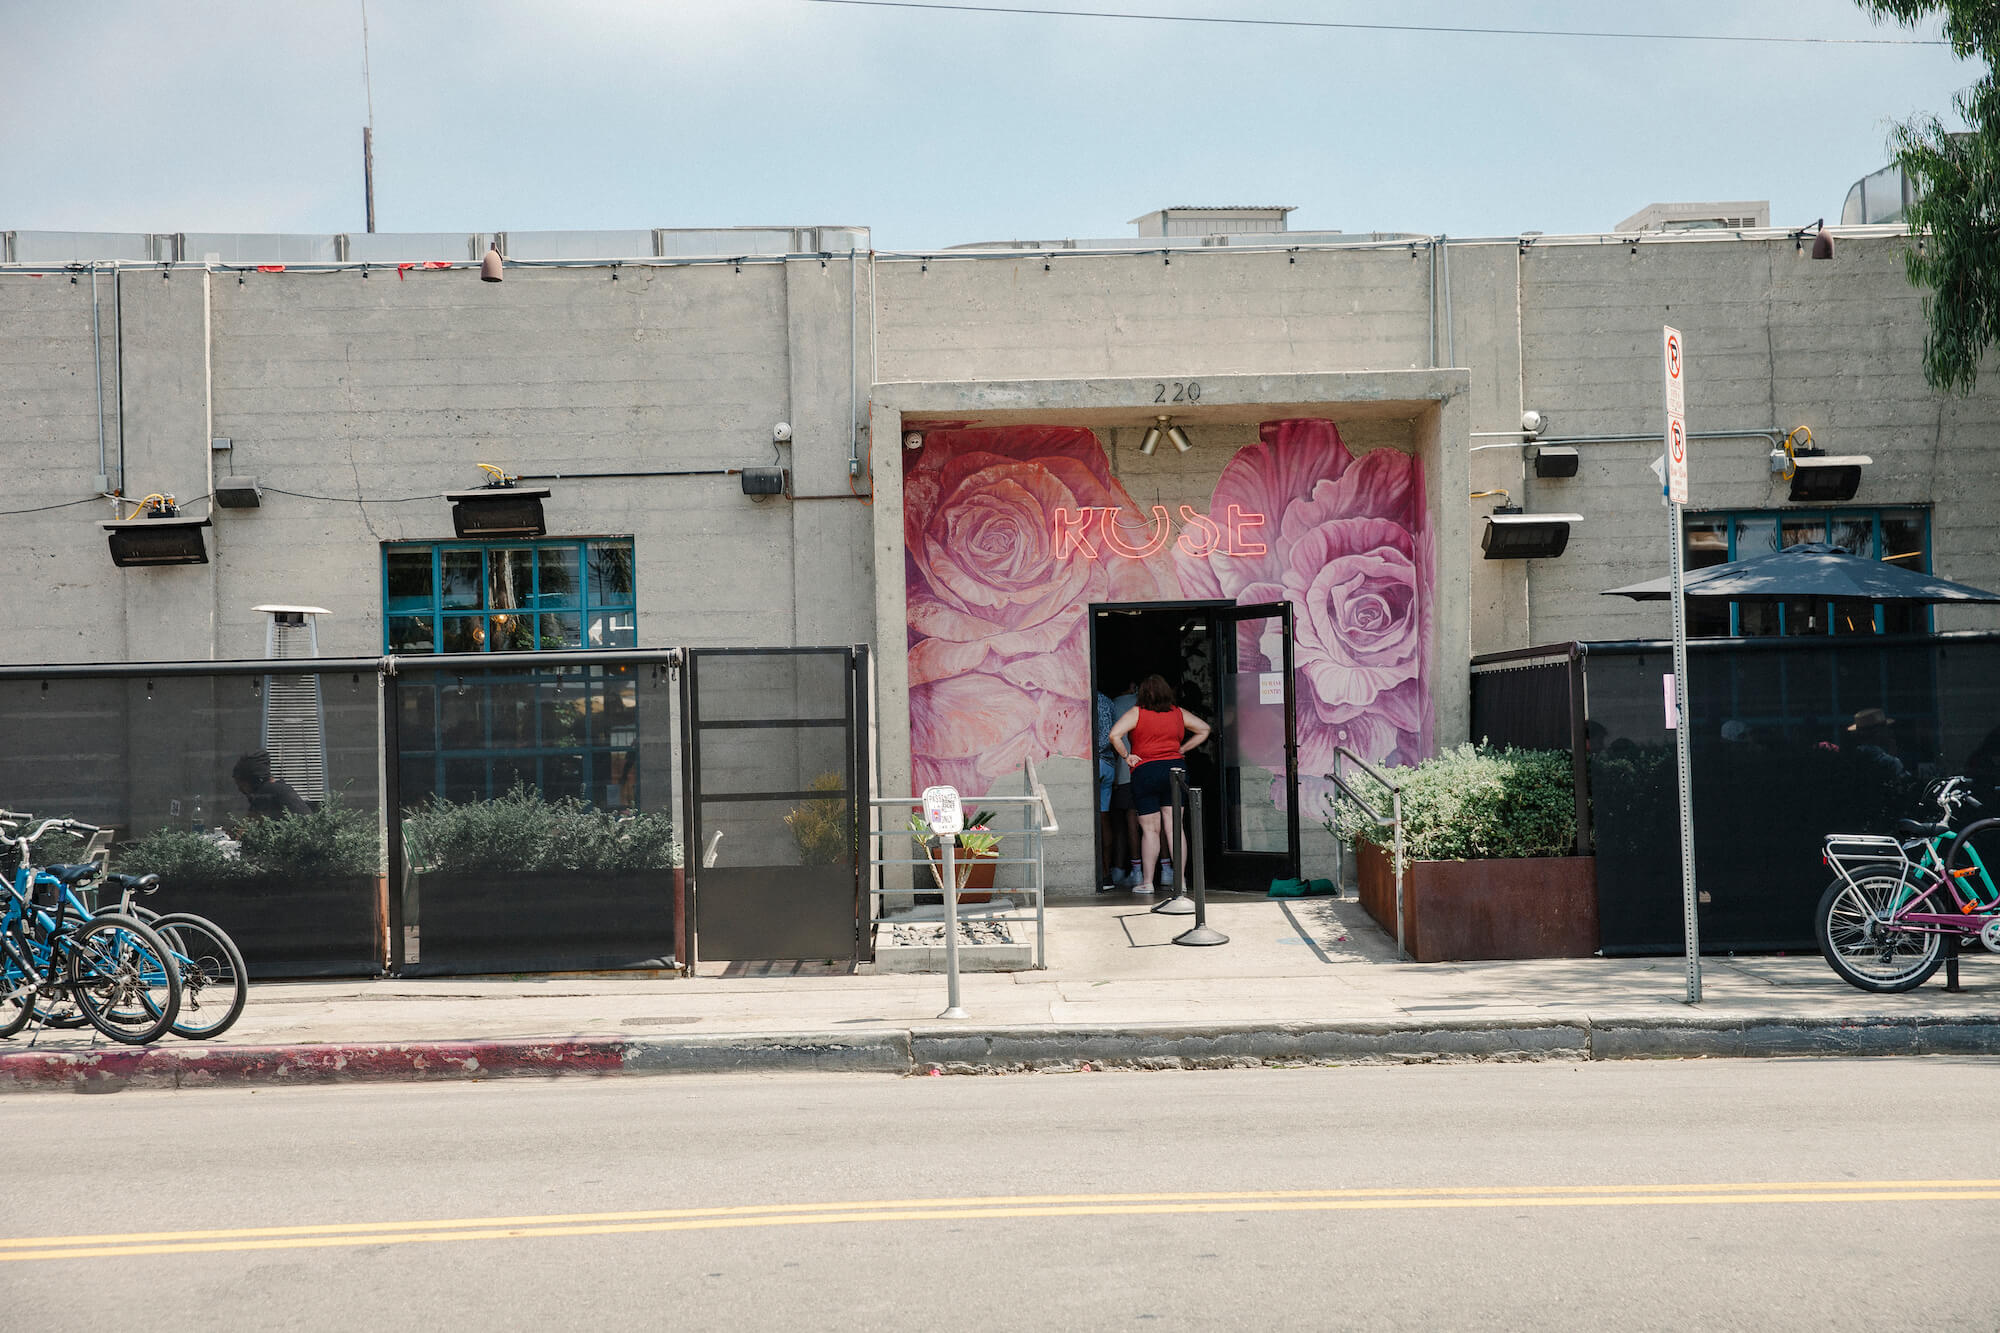 The Rose Venice, two blocks from the Pacific Ocean, has been a neighborhood institution since 1979. Its current owners took over in 2015.